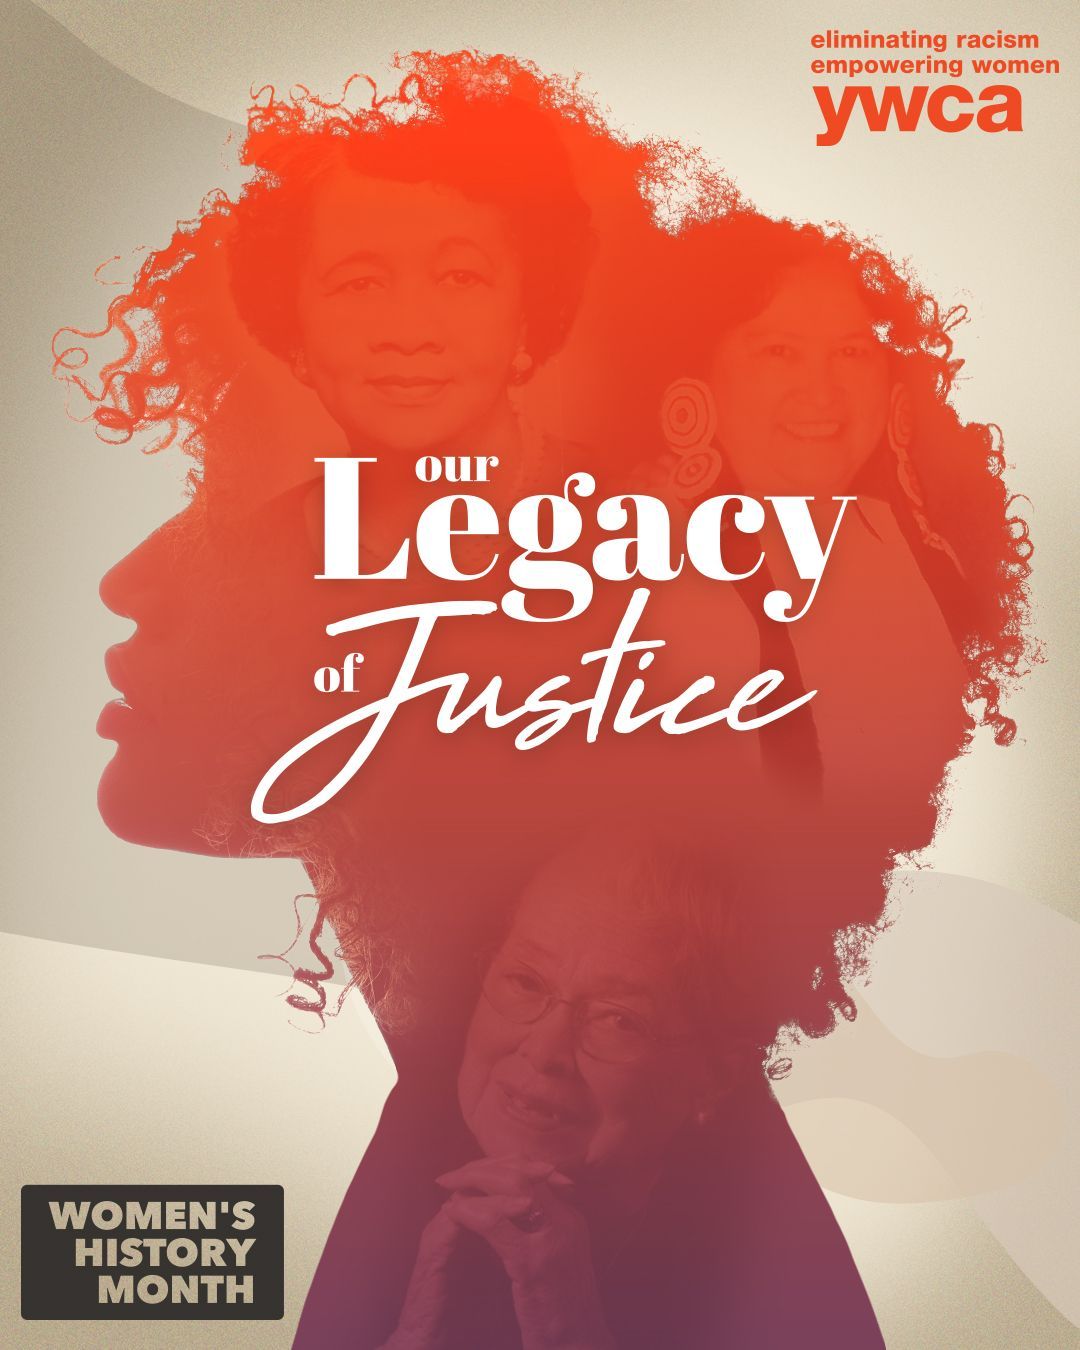 Women's History Month - Our Legacy of Justice